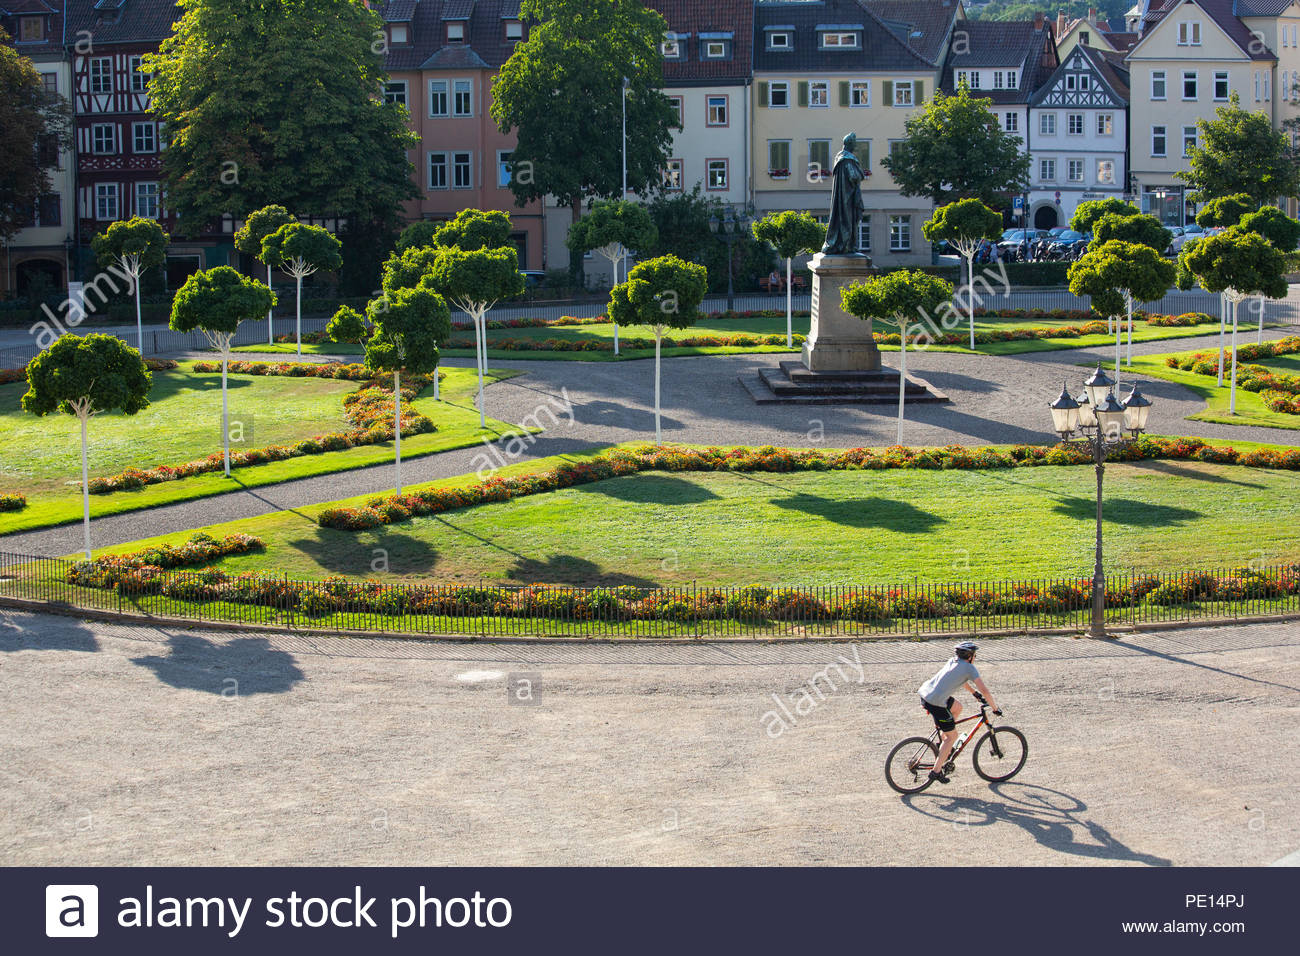 A view of a section of Castle Square (Schlossplatz) in the Franconian town of Coburg, Germany on a sunny day with shadows and a statue to Ernst I. Stock Photo